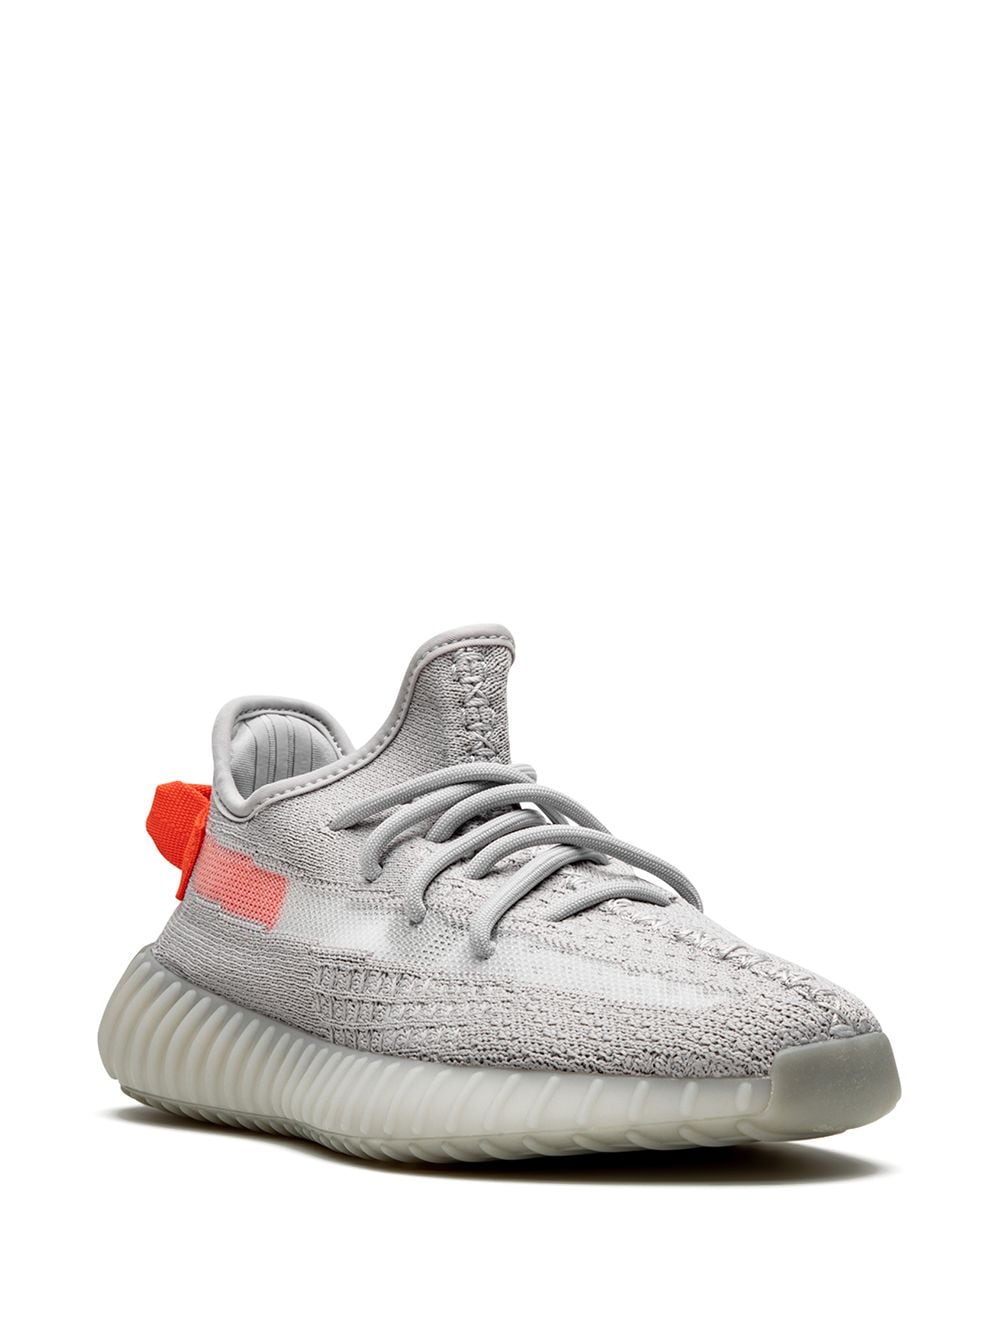 Image 2 of adidas Yeezy Boost 350 V2 "Tail Light" sneakers